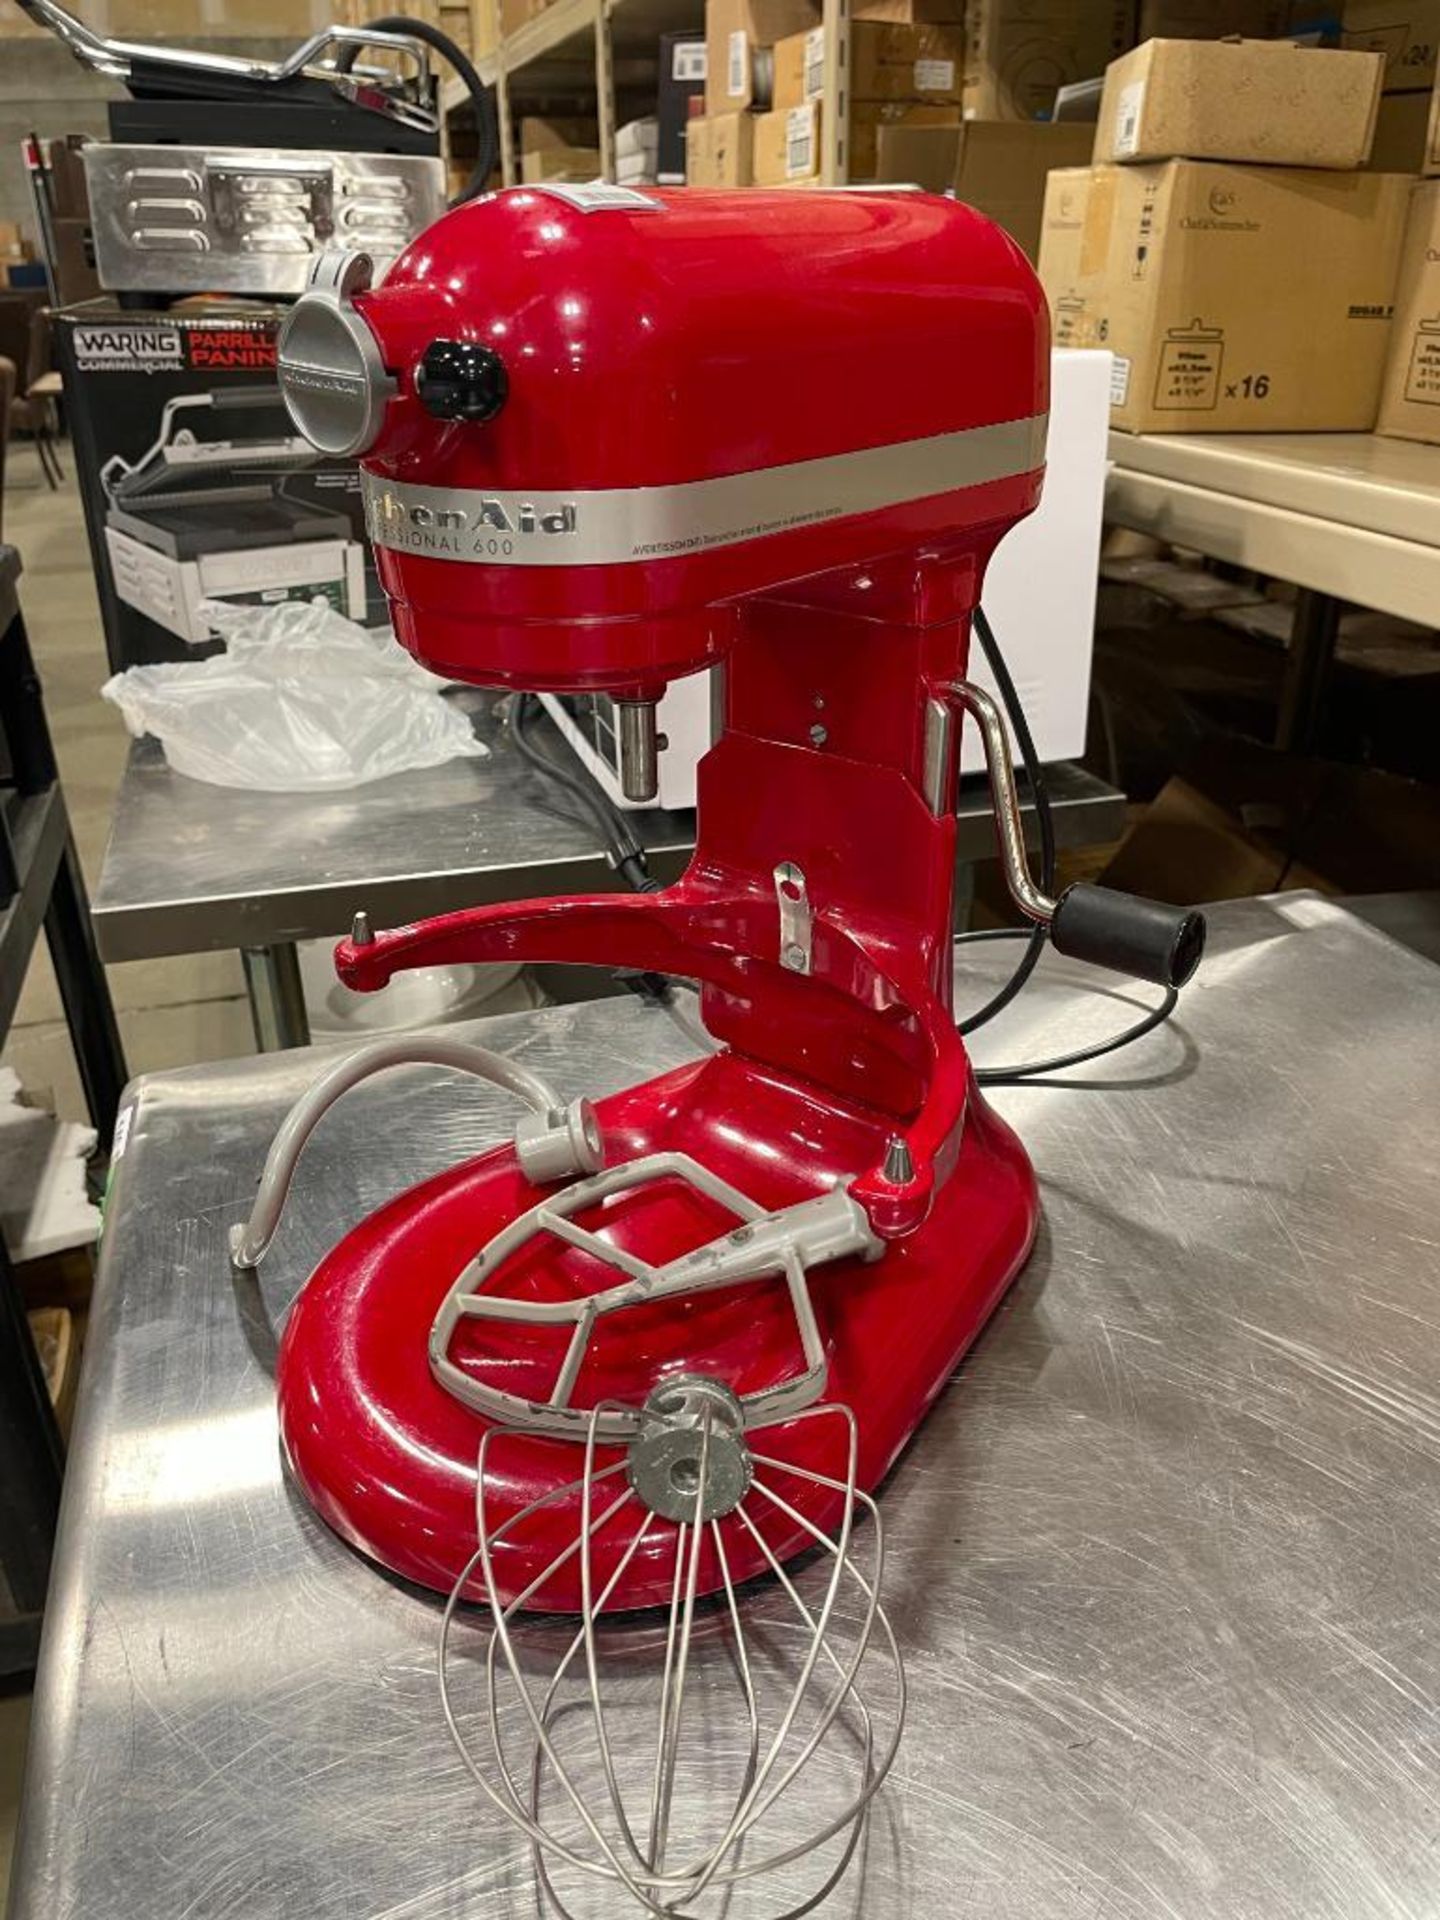 KITCHENAID PROFESSIONAL 600 SERIES 6-QUART BOWL-LIFT STAND MIXER WITH ATTACHMENTS - Image 3 of 12